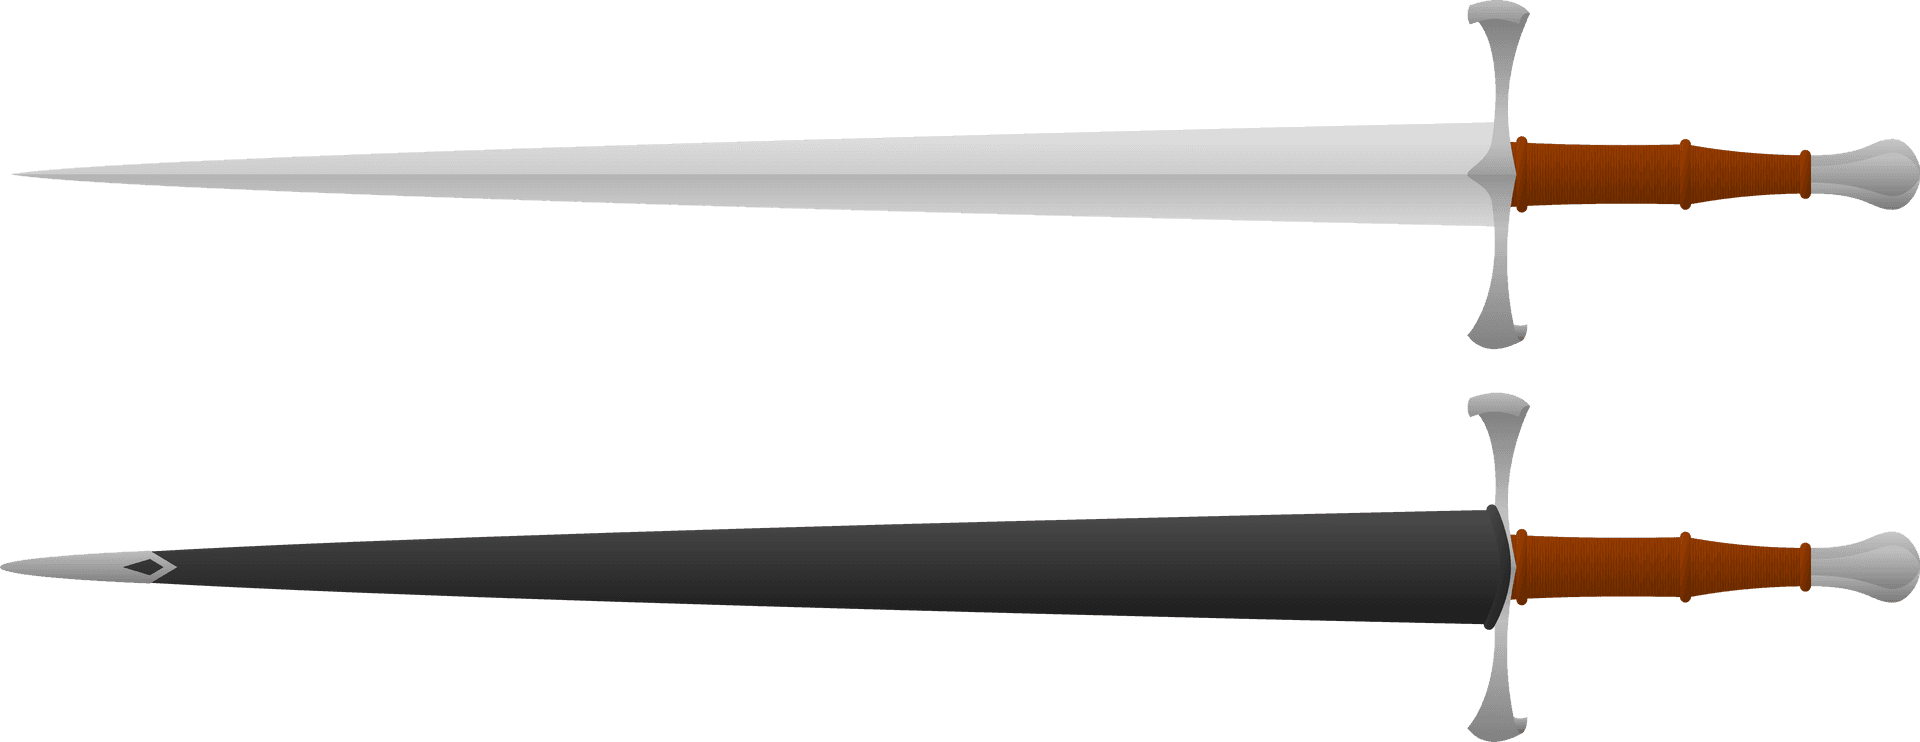 Medieval Daggerwith Scabbard PNG